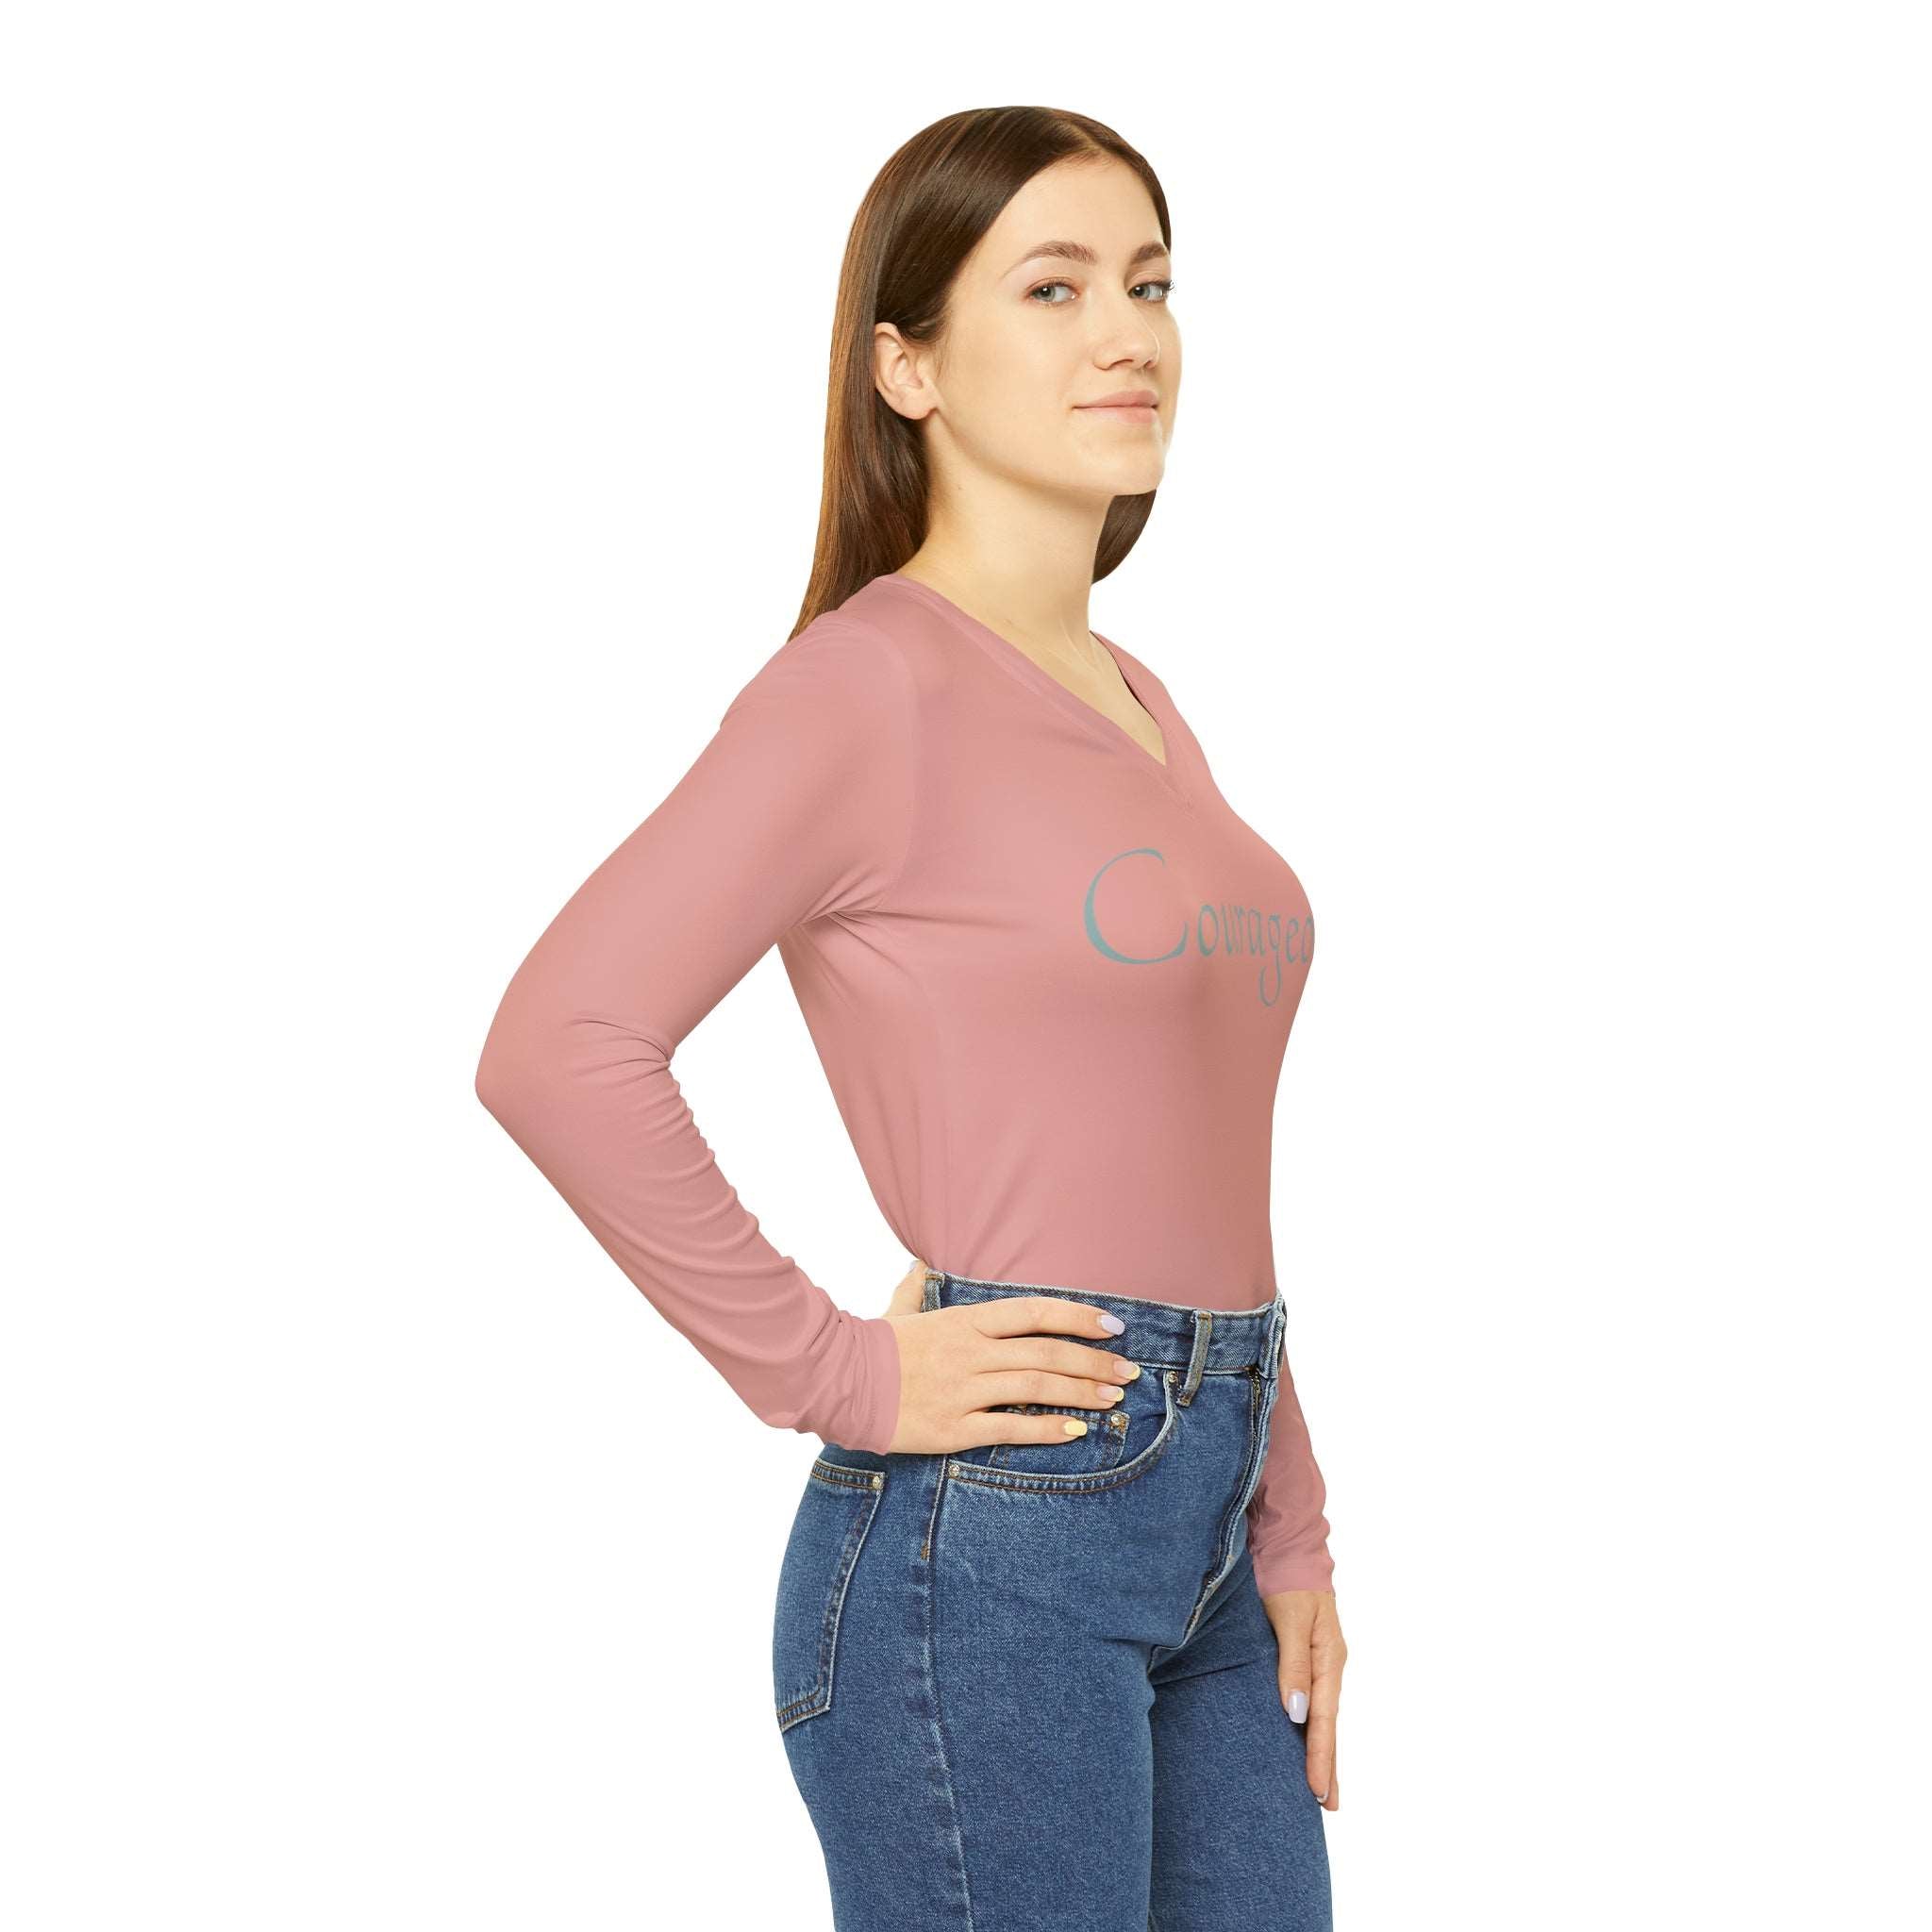 Courageous Long Sleeve V-Neck: Start Conversations Casual Shirt Double Needle Stitching Everyday Wear Mental Health Donation Polyester Spandex Blend Statement Shirt Strong Shirt Tee for Women All Over Prints 3948702741984568959_2048_55699d0b-7683-4f21-ac0b-f8293d2016c3 Printify